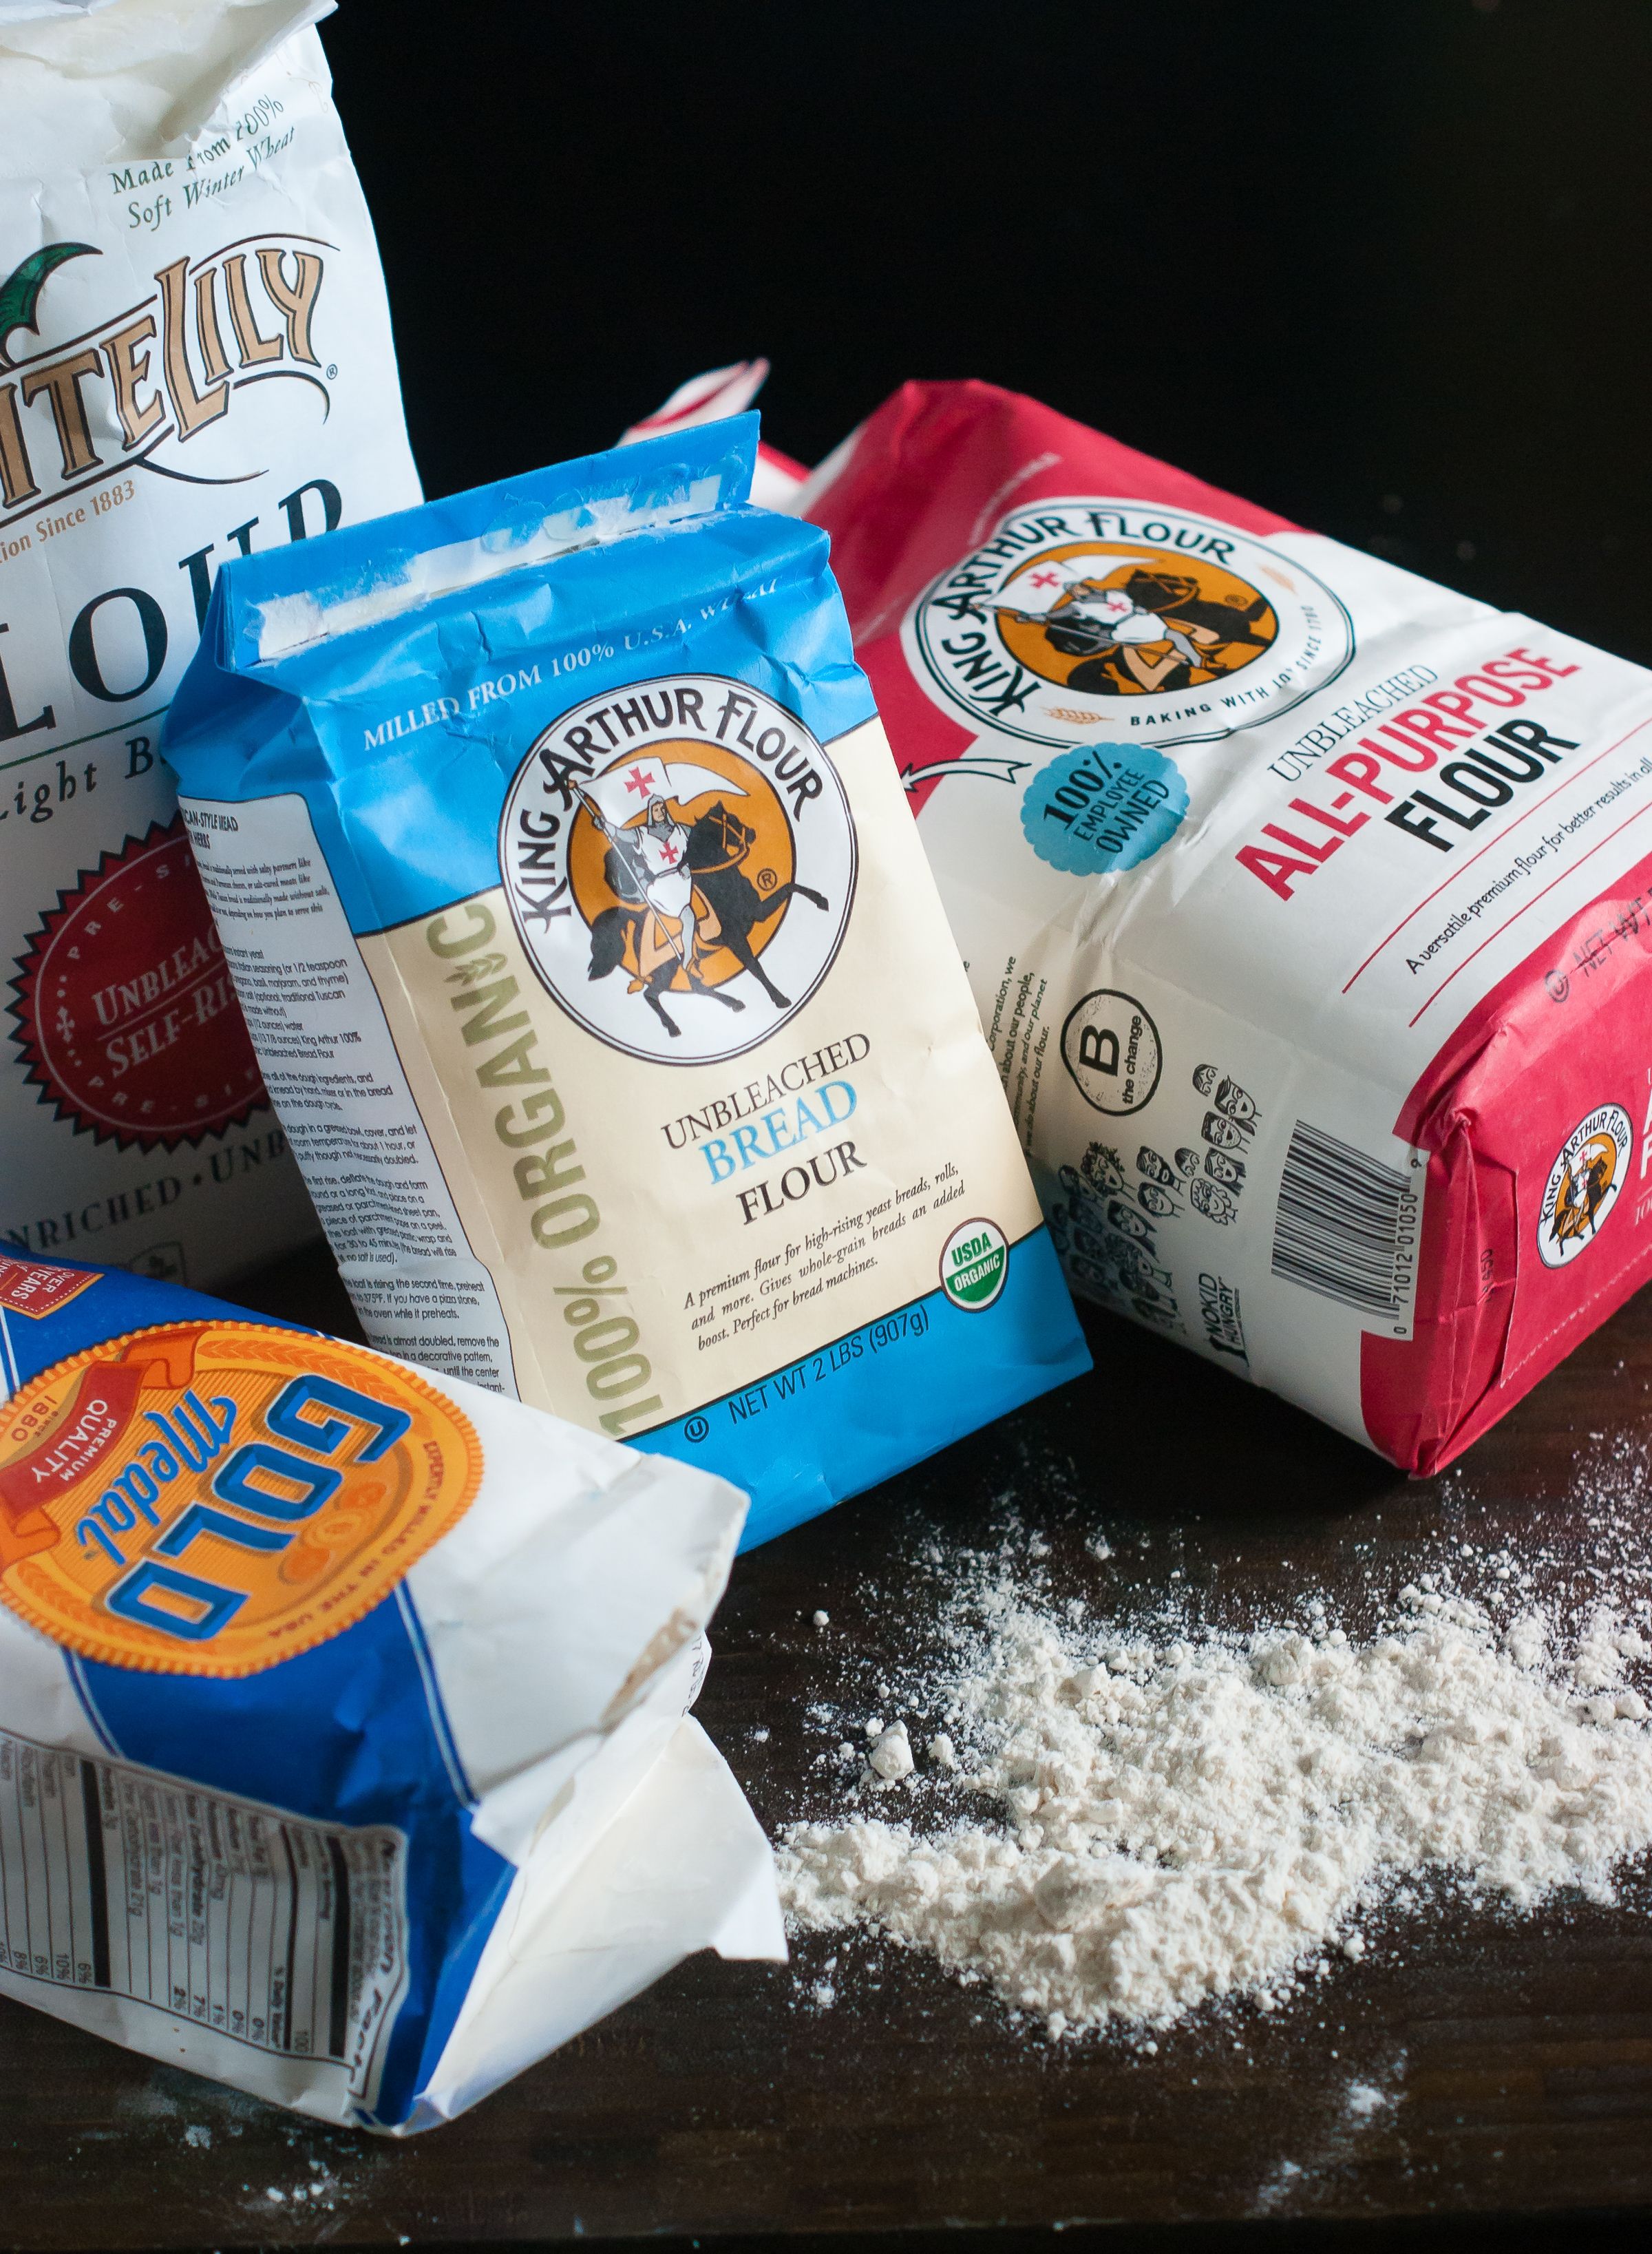 Why use Cake Flour? All your questions about cake flour answered!